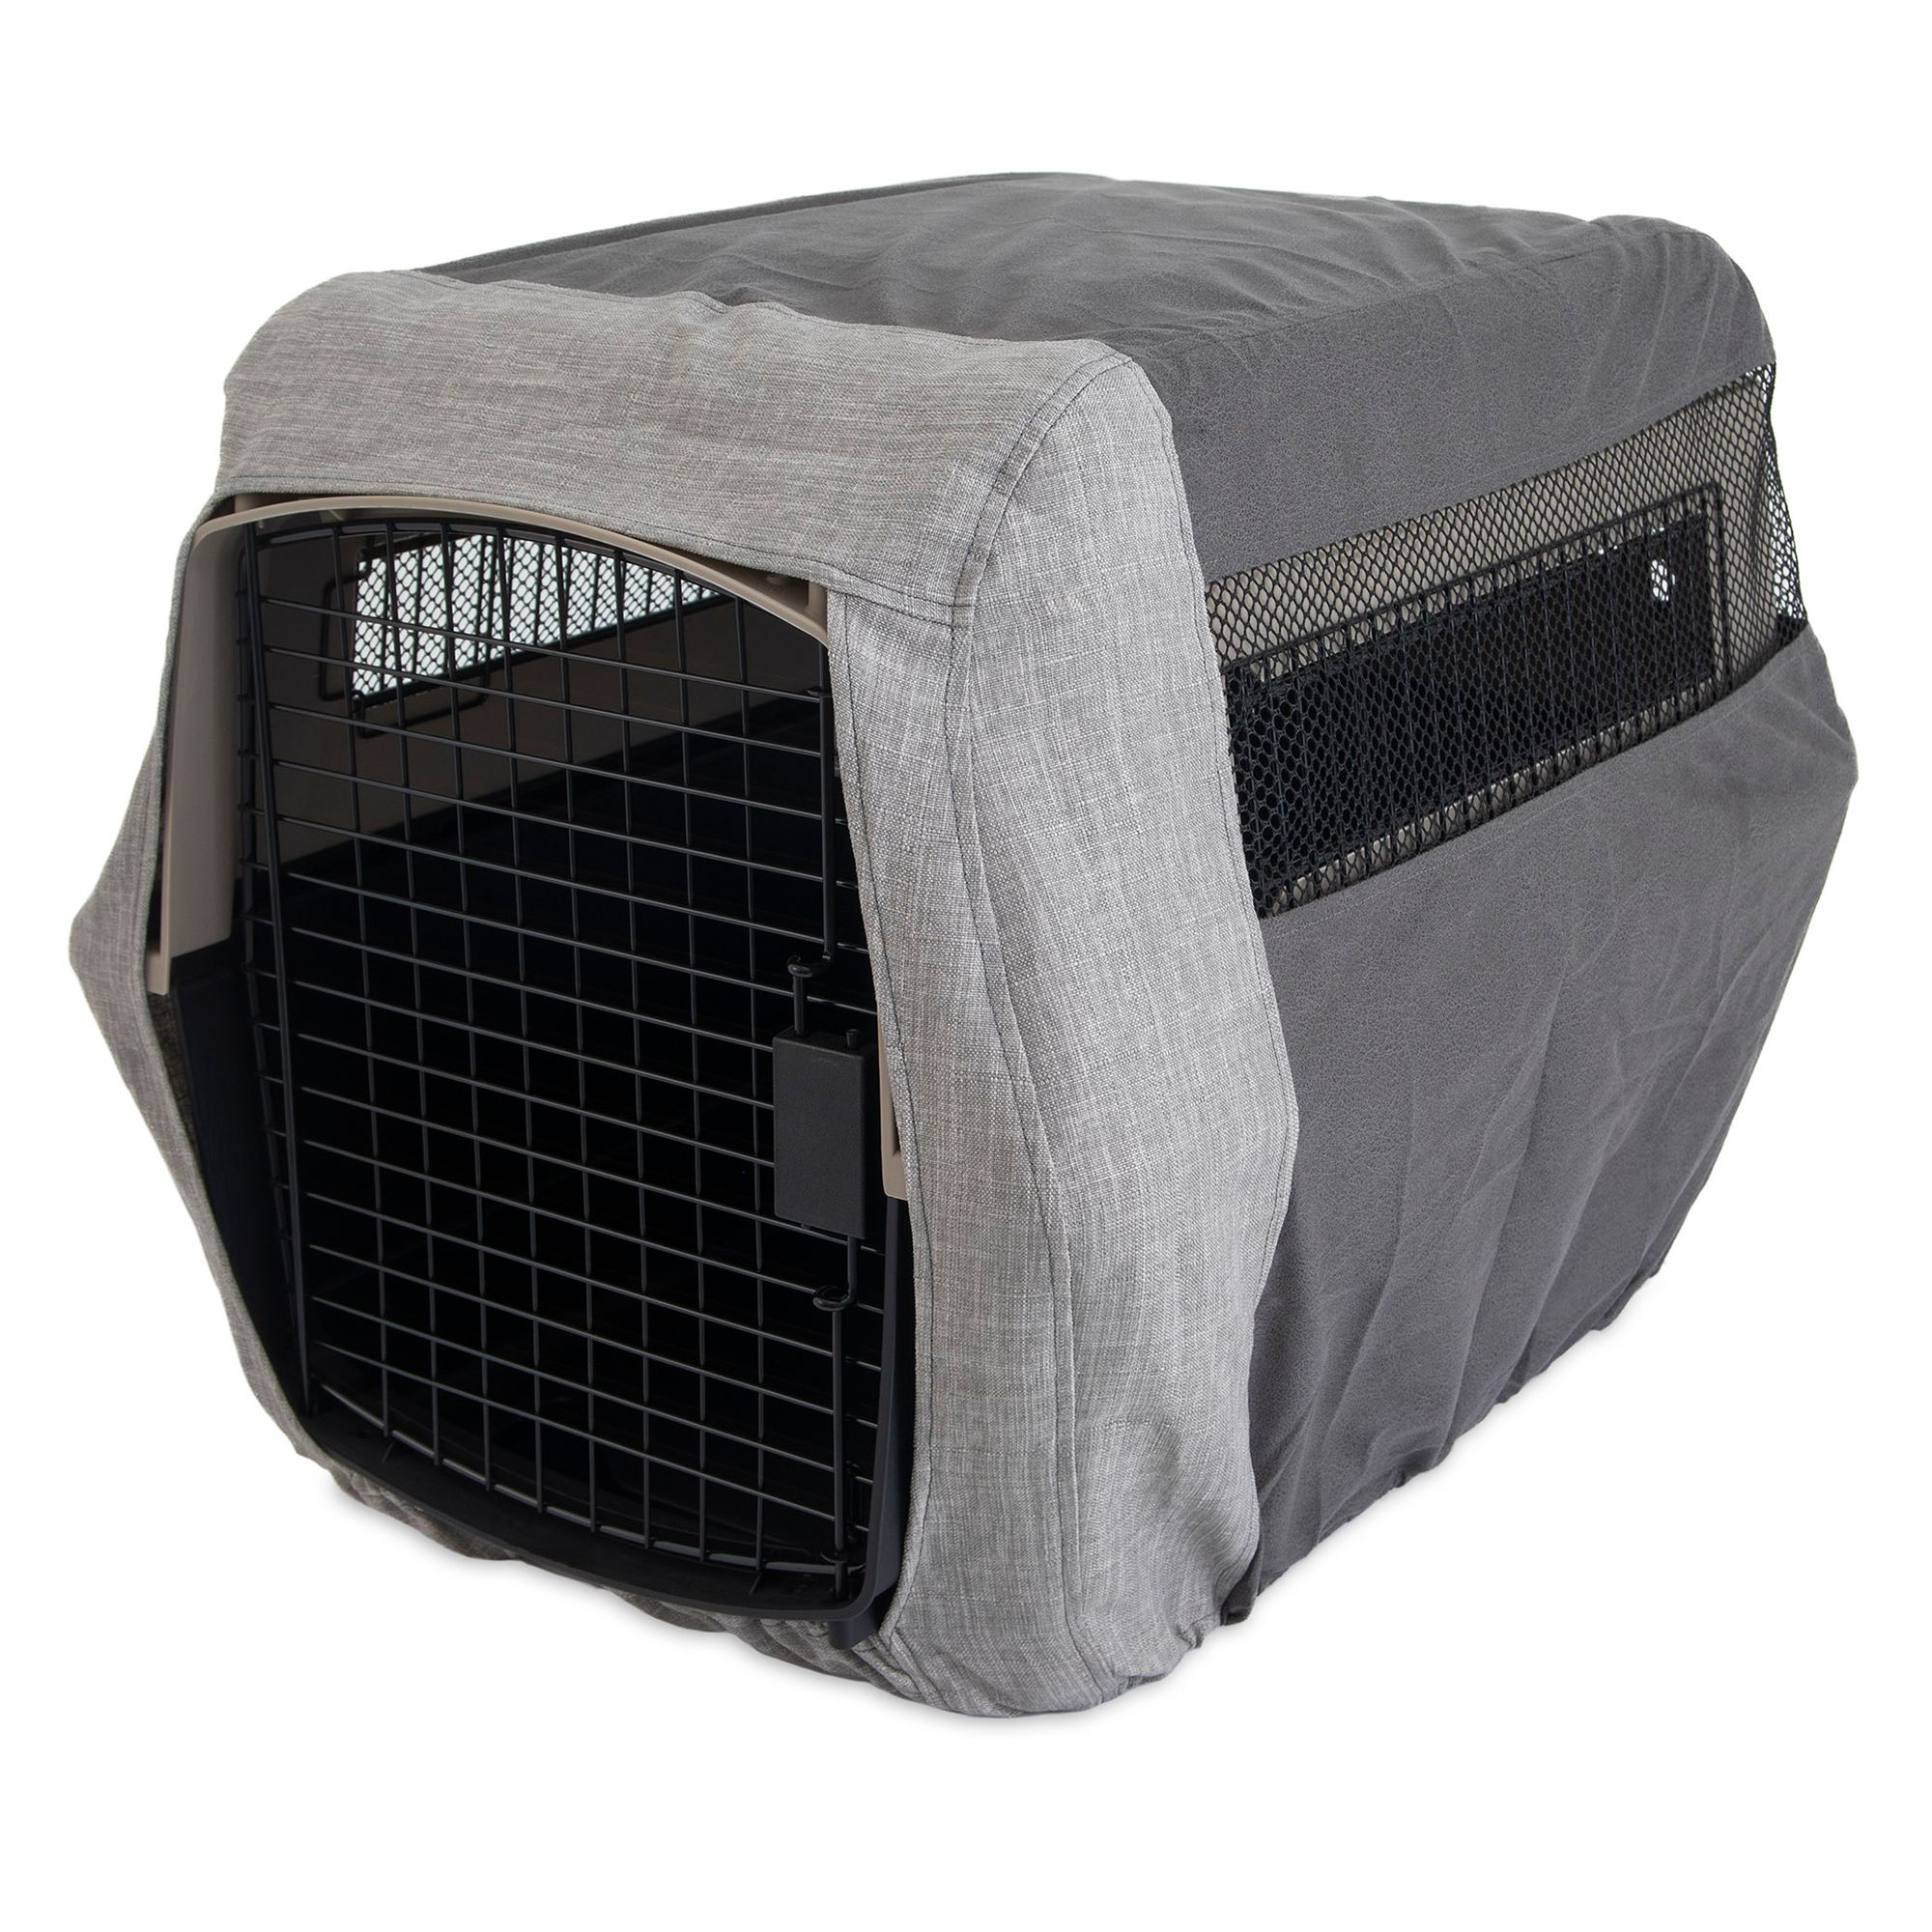 Durable Waterproof Pet Kennel Covers with Mesh Window Ishine Dog Crate Cover Durable Pet Kennel Case Cat Cage Dust Cover for Wire Crate